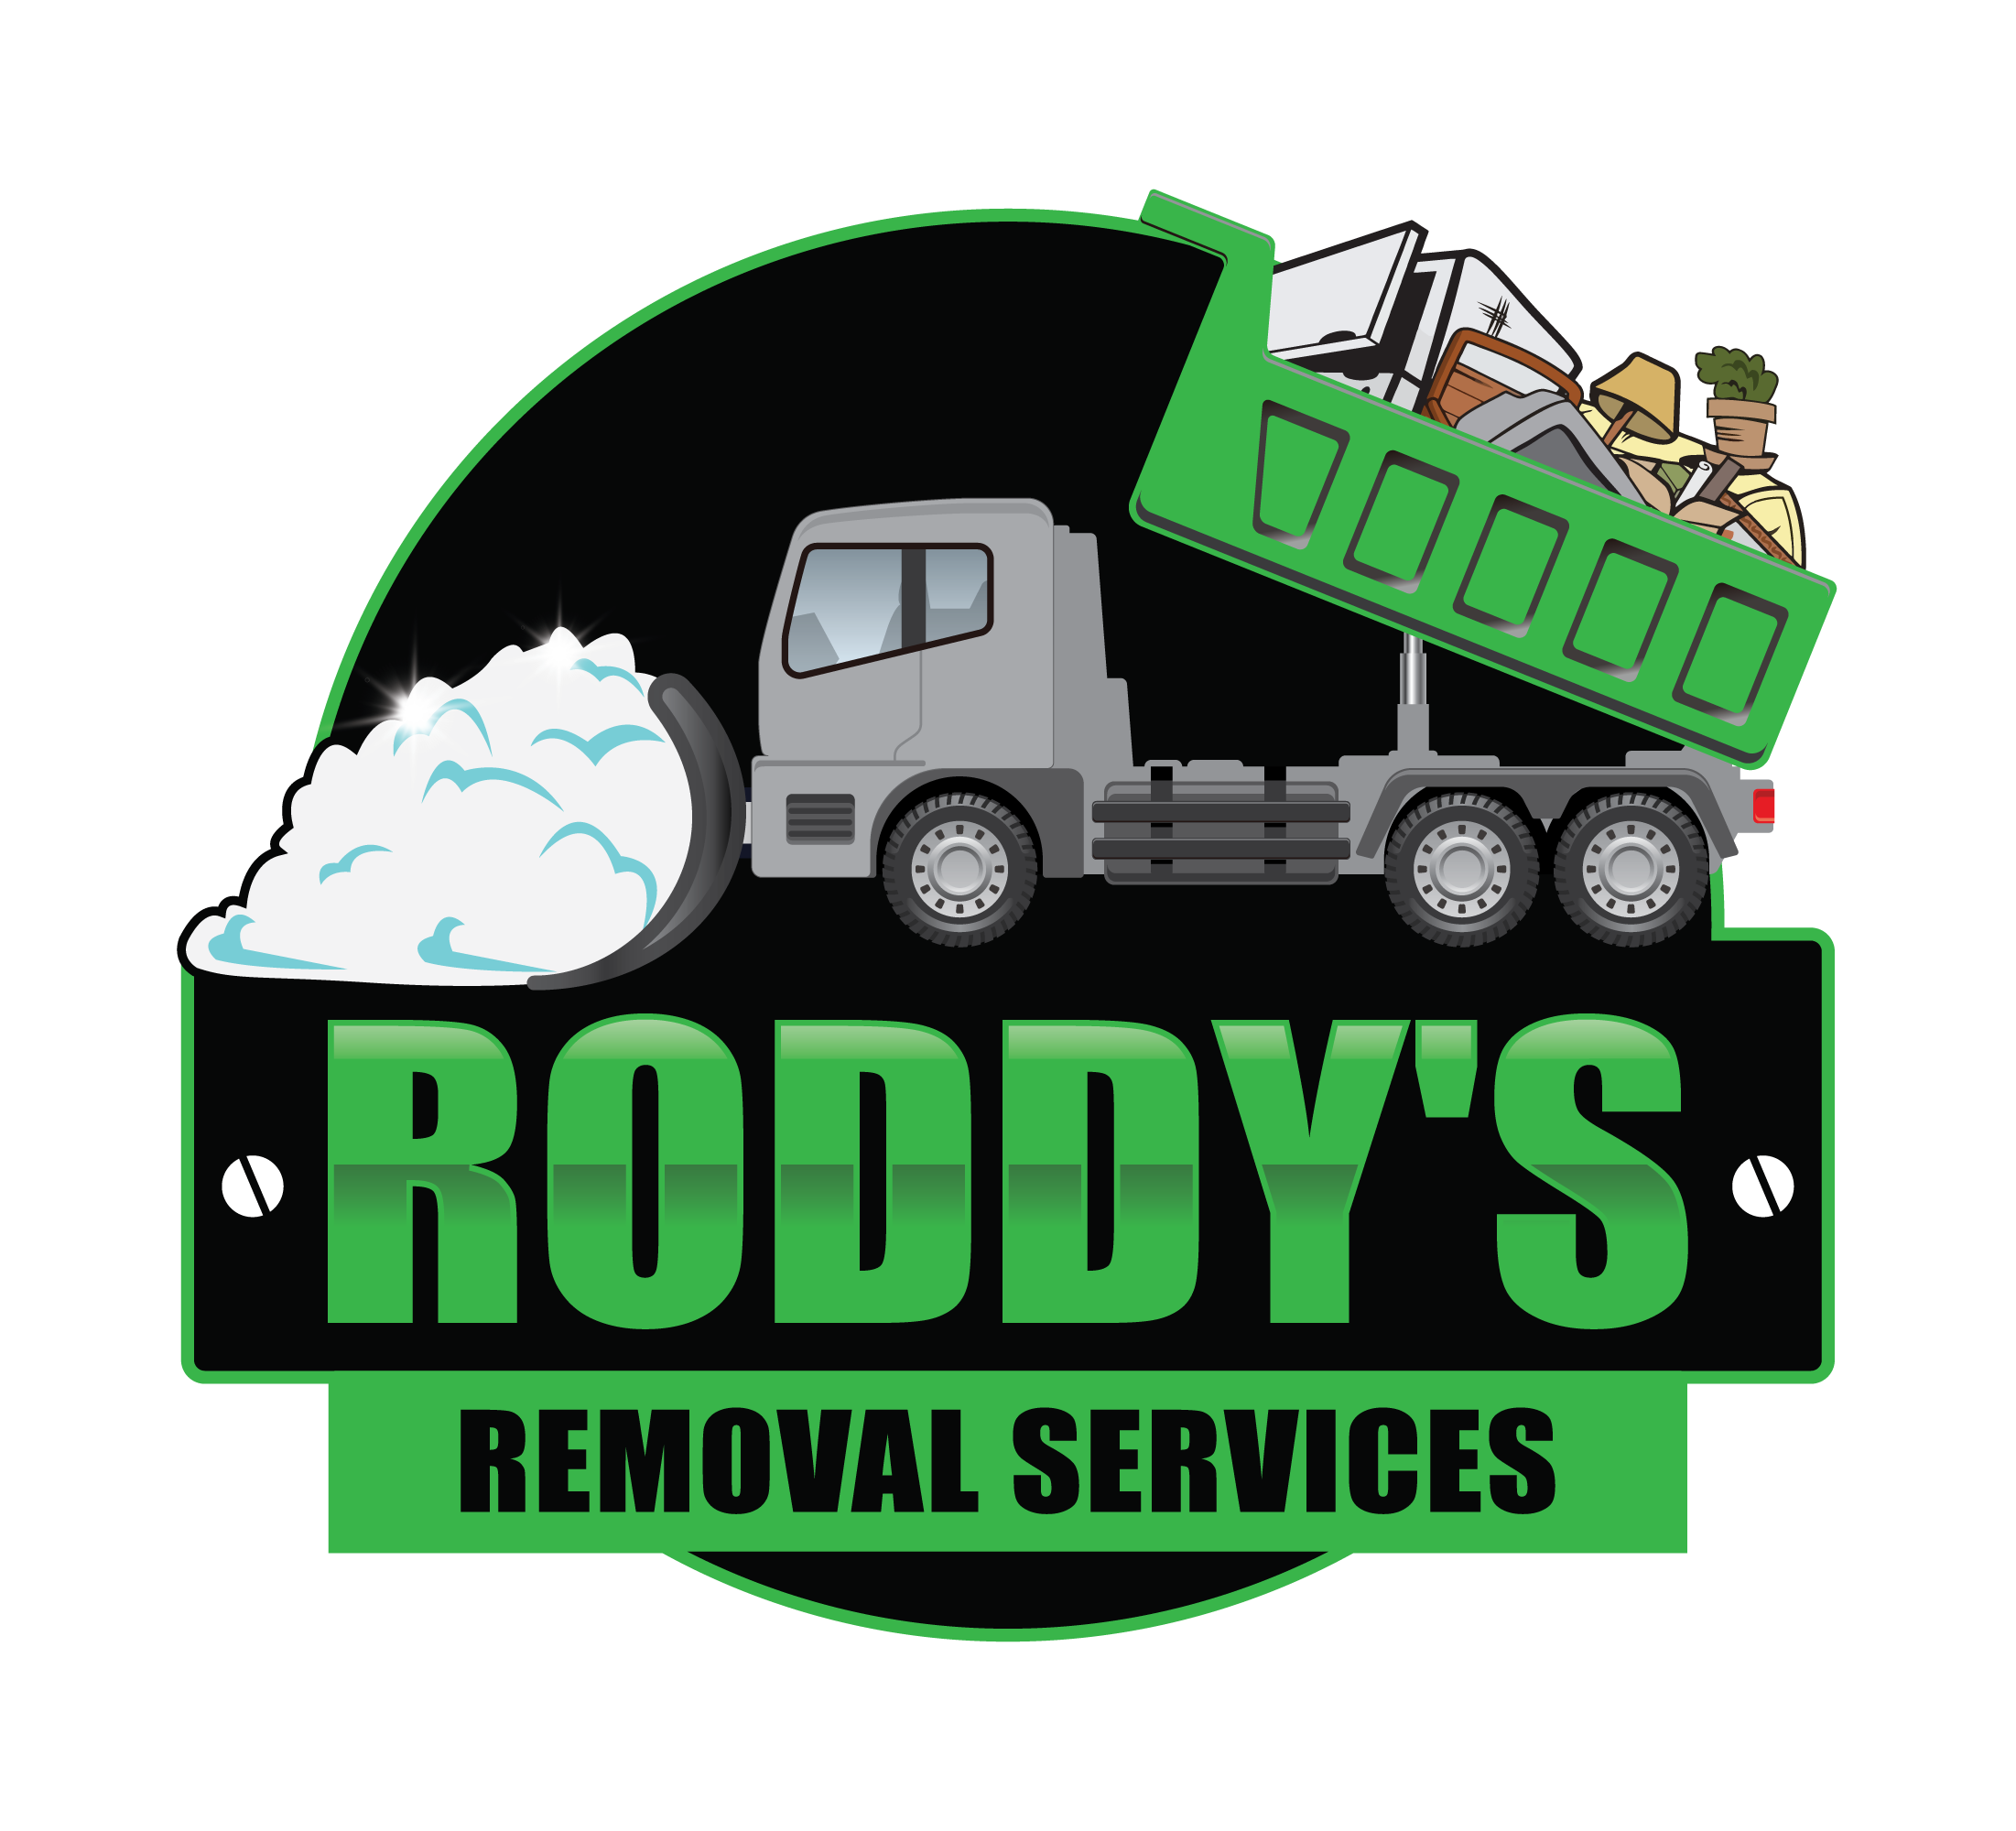 Roddy’s Removal Services